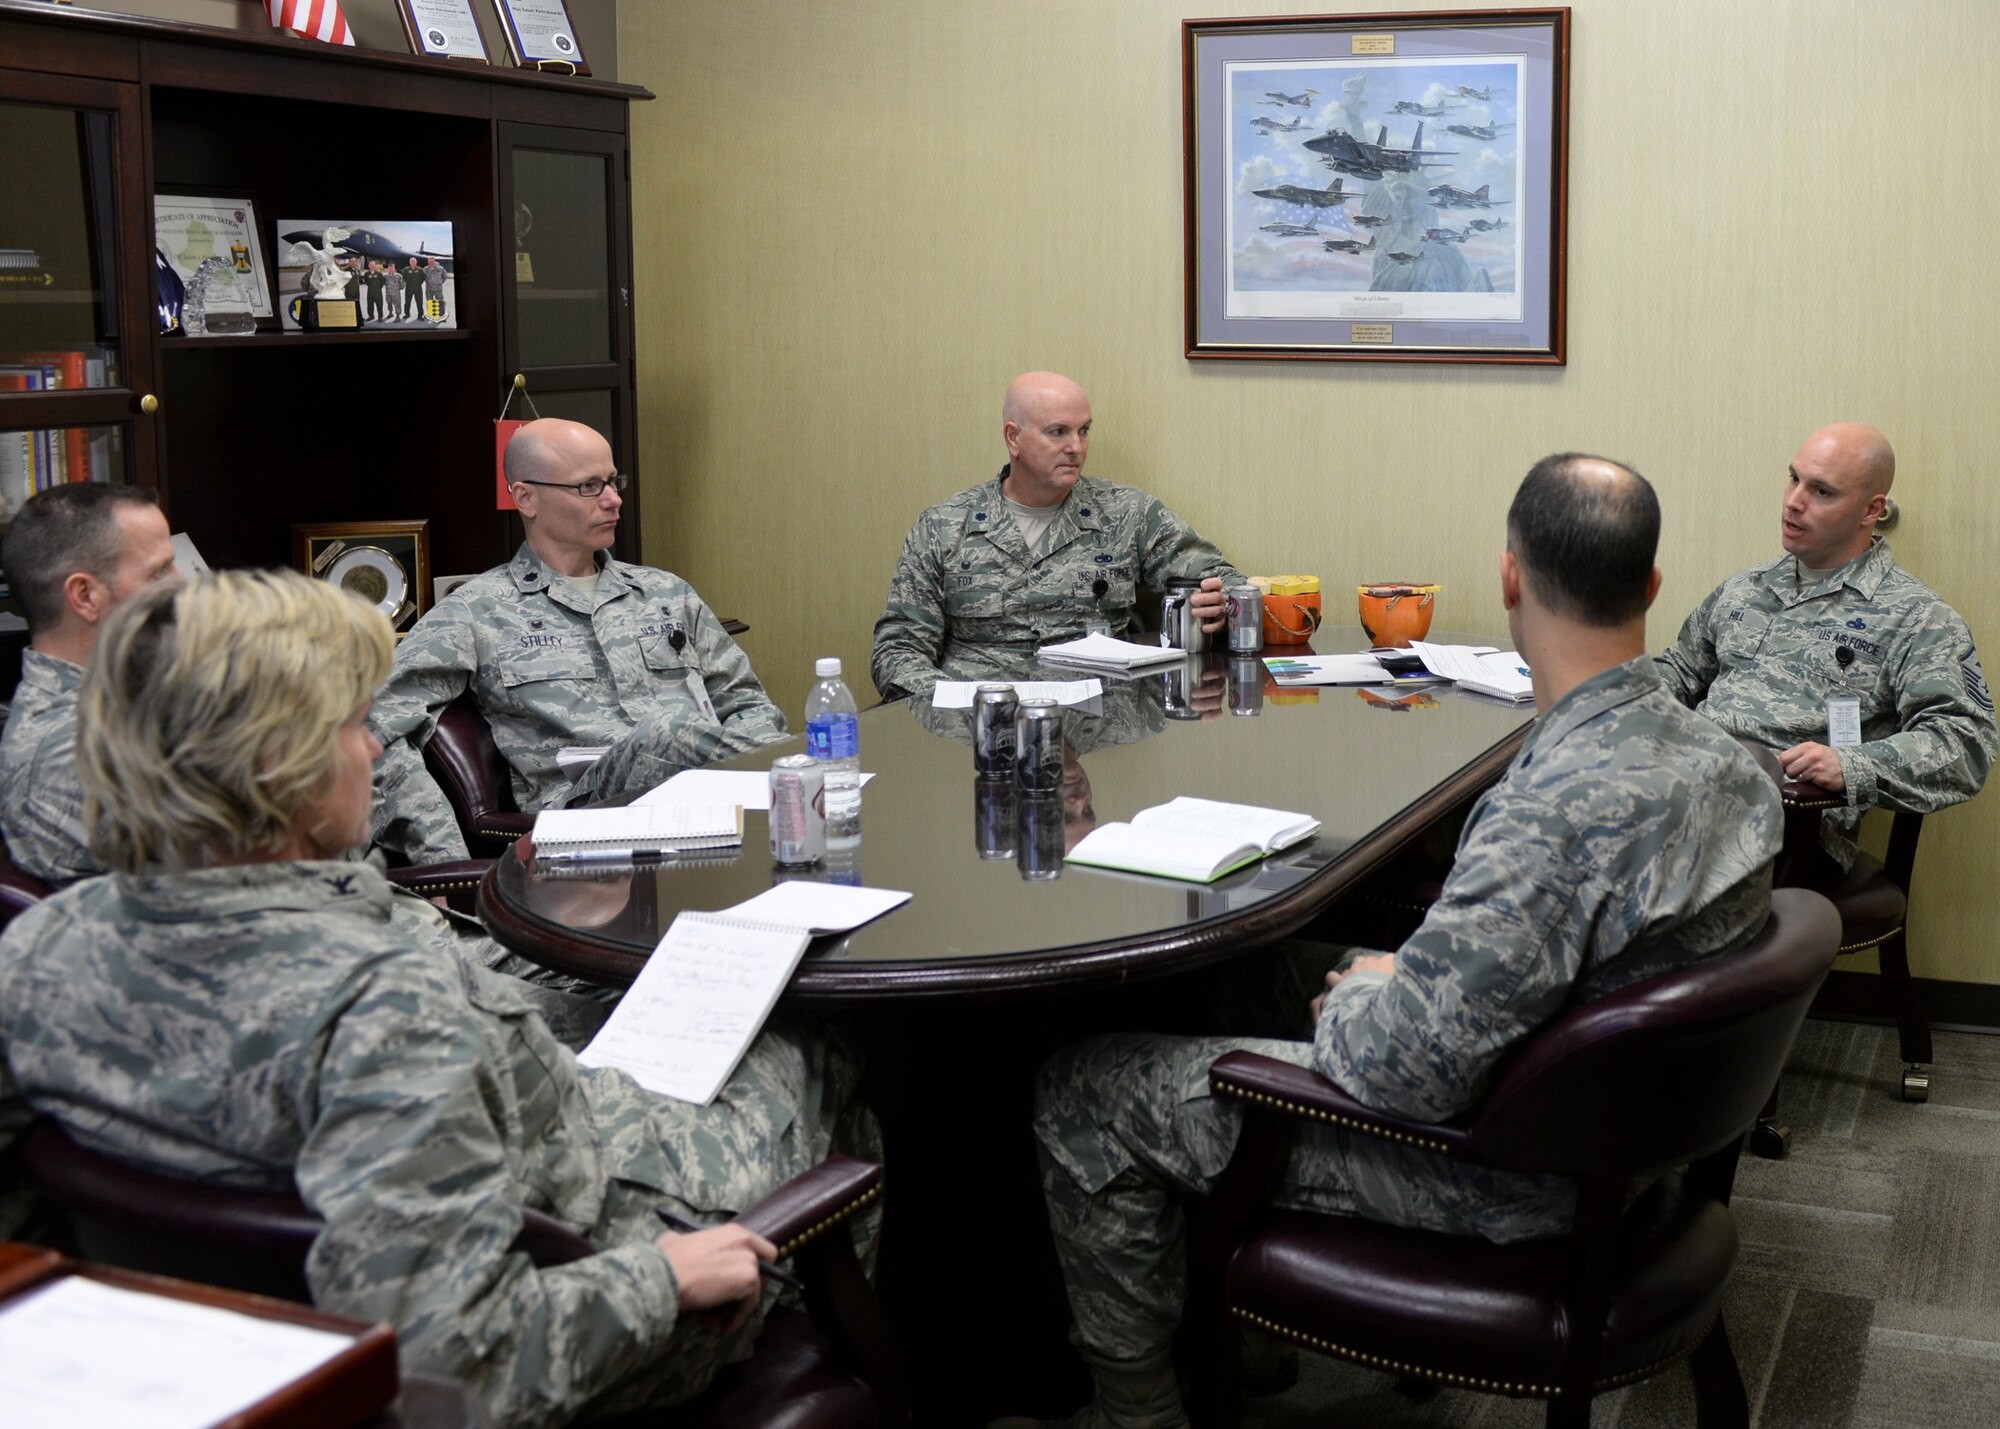 Master Sgt. Patrick Hill, 28th Medical Group first sergeant, briefs the 28th MDG leadership on how Airmen are doing within their group and squadrons inside the 28th MDG facility at Ellsworth Air Force Base, S.D., Nov. 13, 2014. As the first sergeant, Hill is responsible for the morale, welfare, and conduct of all members in the 28th MDG. (U.S. Air Force photo by Senior Airman Anania Tekurio/Released)